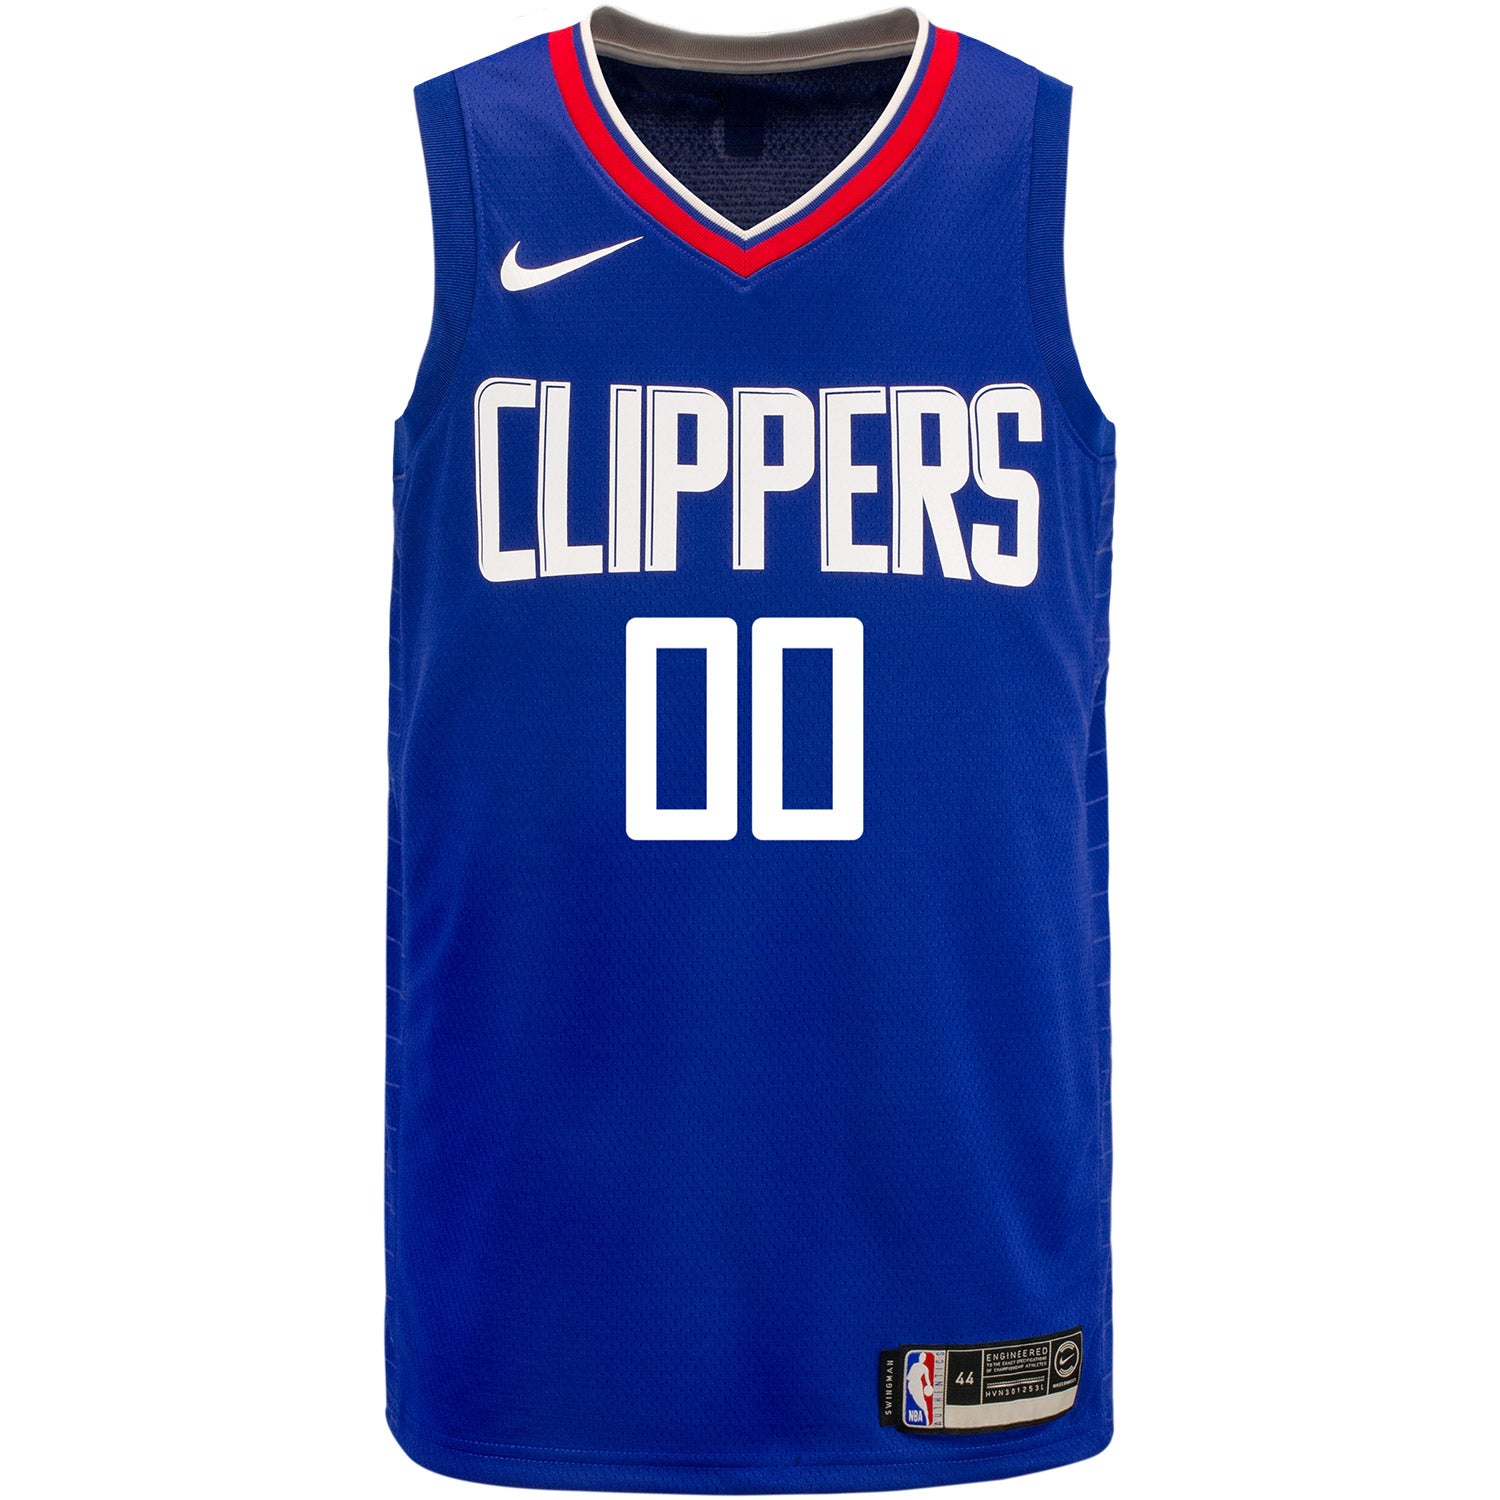 LA Clippers Store, Clippers Jerseys, Apparel, Merchandise